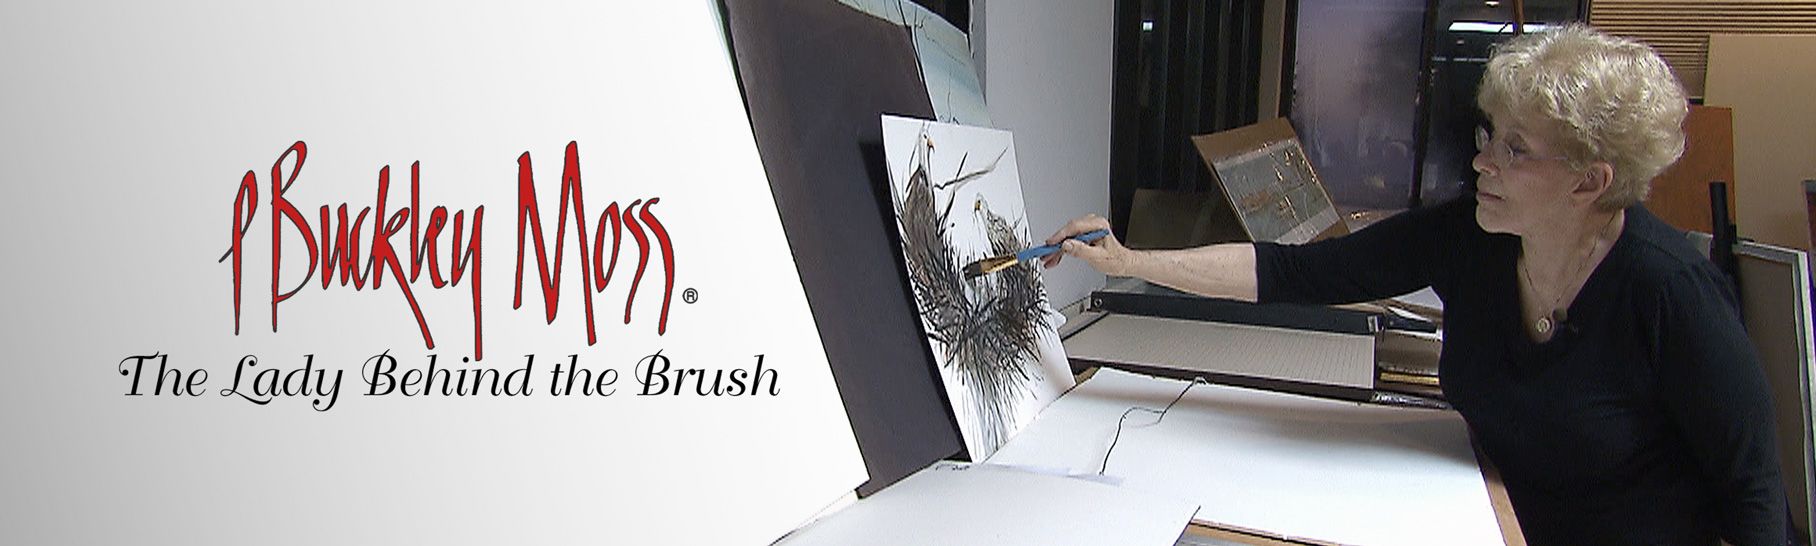 P. Buckley Moss: The Lady Behind the Brush